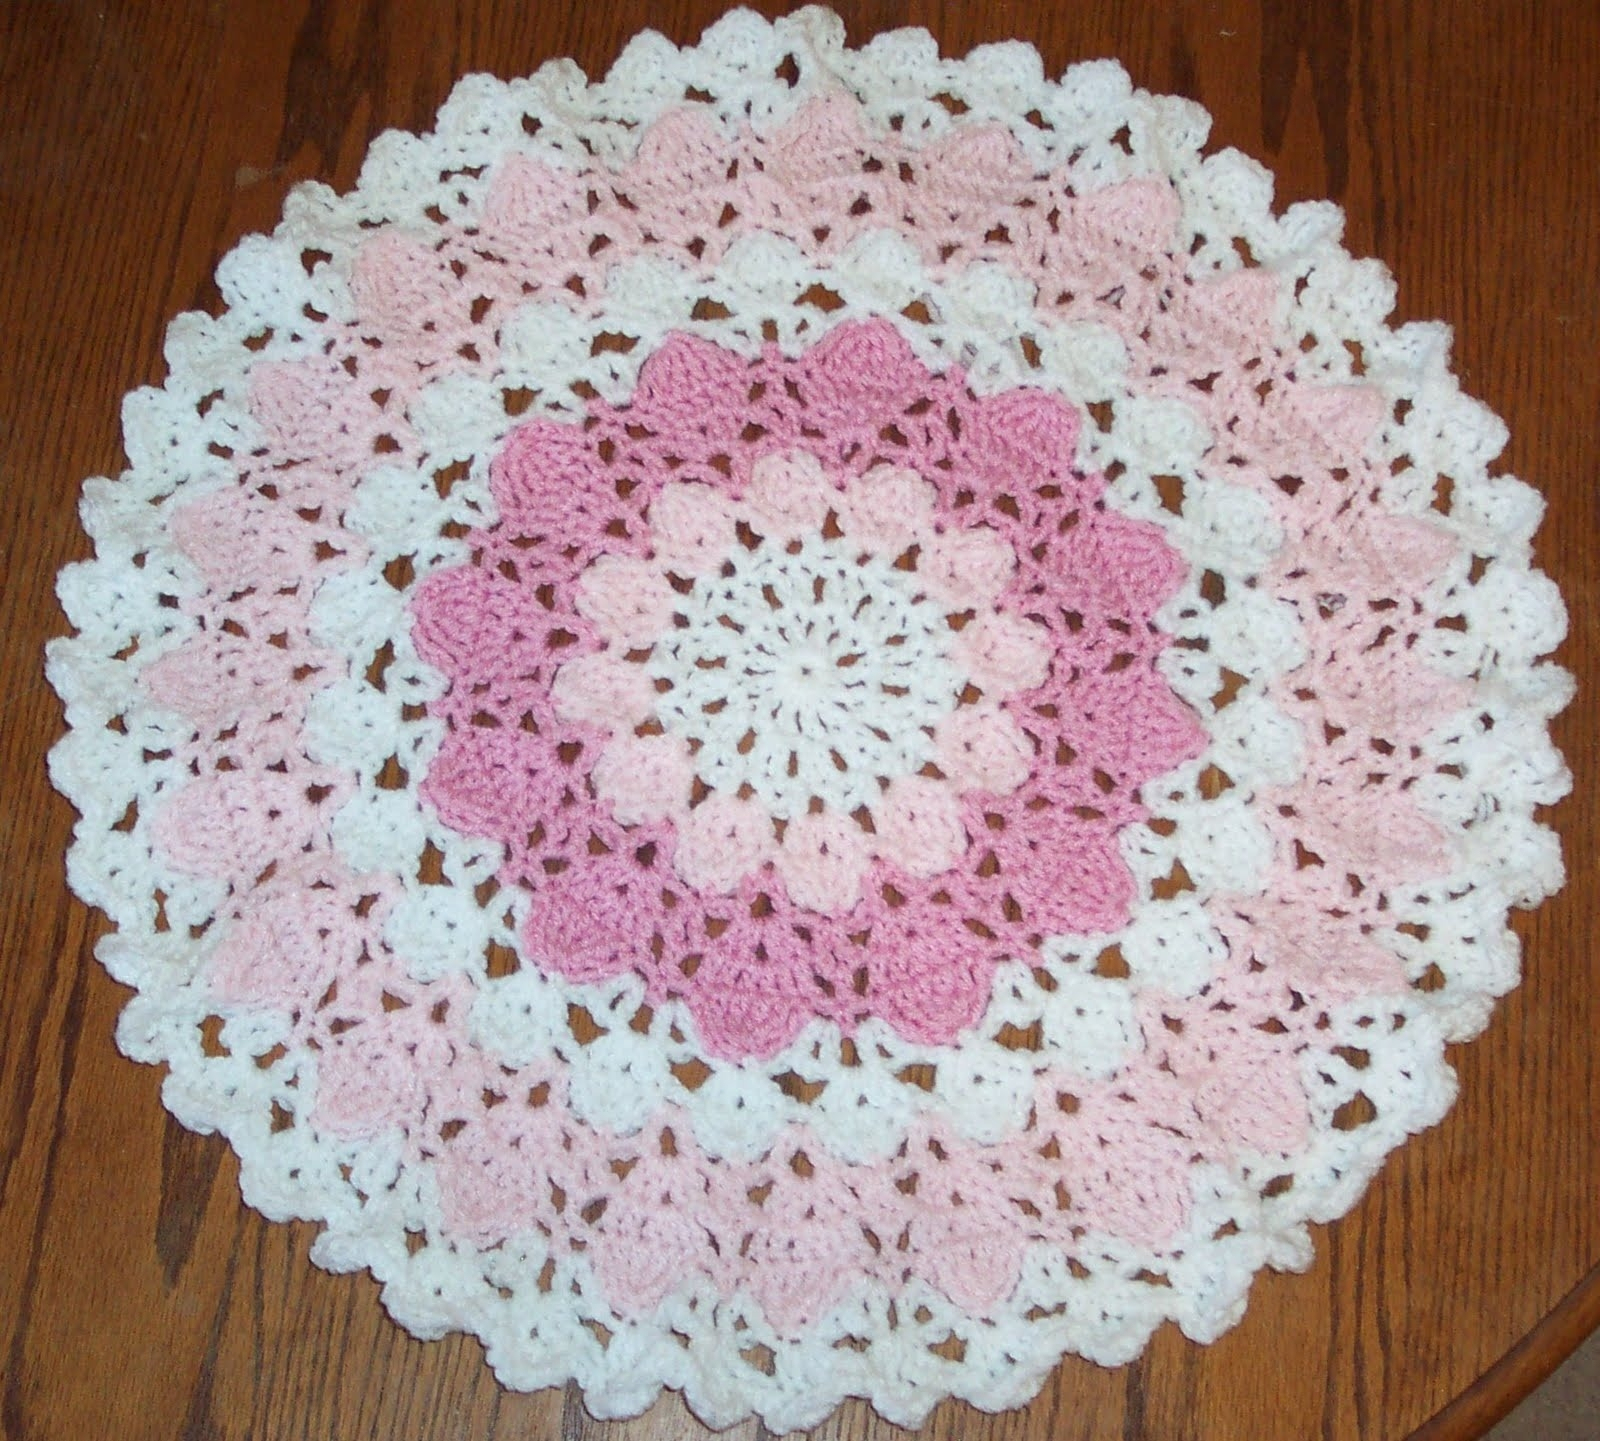 Pictures Of Printable Free Crochet Patterns … Of Crochet Doily For - Free Printable Crochet Patterns